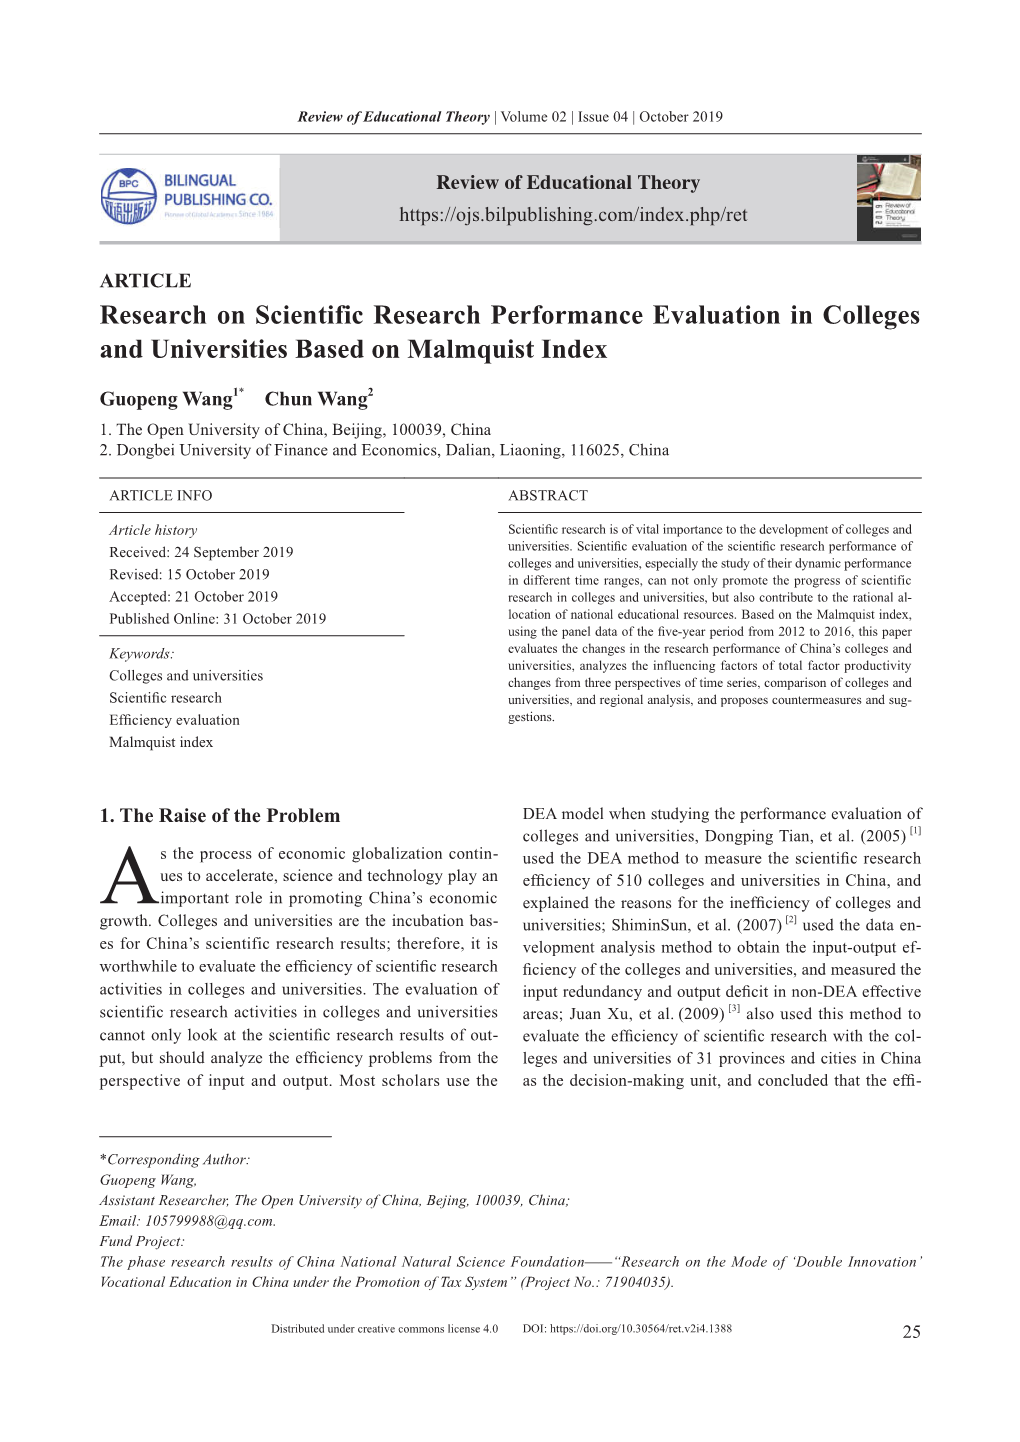 Research on Scientific Research Performance Evaluation in Colleges and Universities Based on Malmquist Index